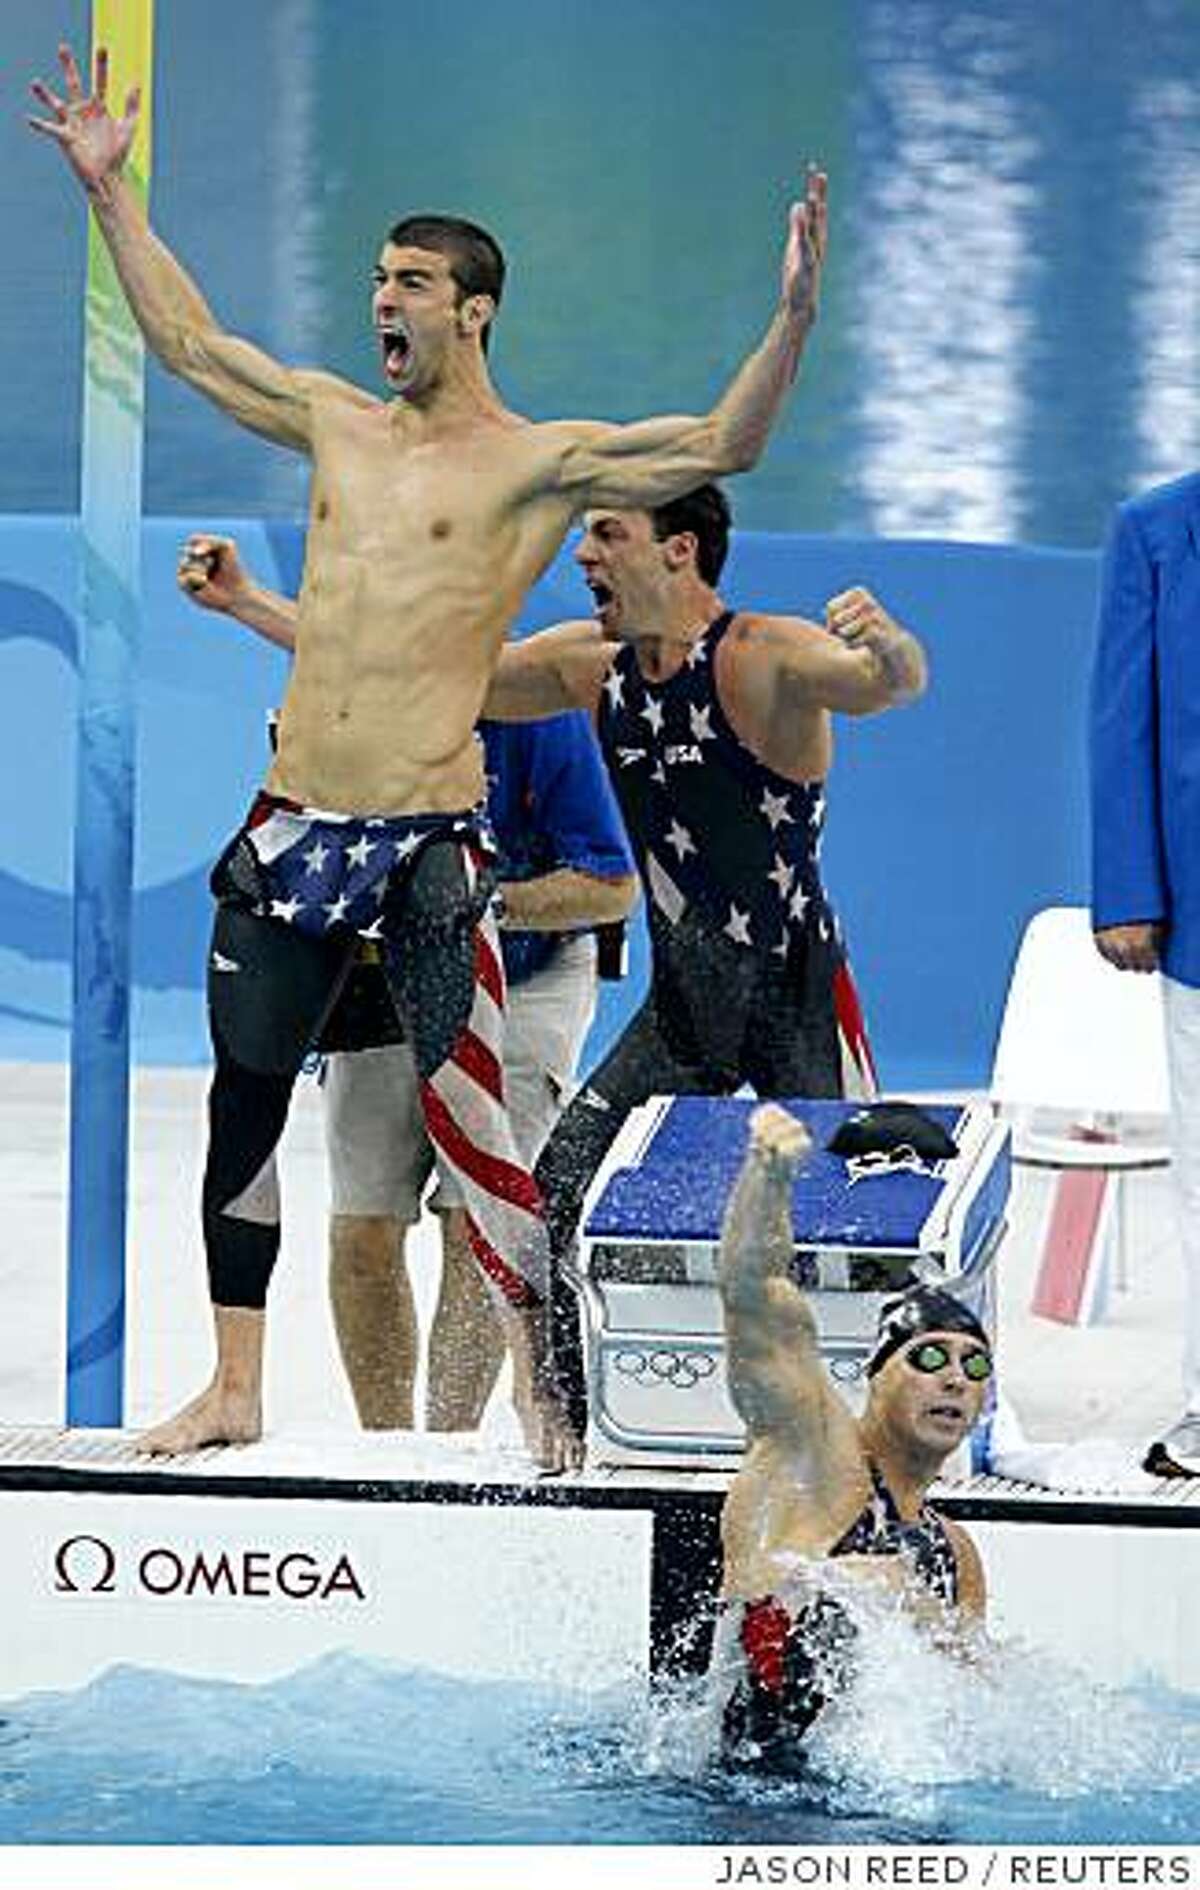 (L-R) Michael Phelps, Garrett Weber-Gale and Jason Lezak of the U.S. celebrate after winning the men's 4x100m freestyle relay swimming final at the National Aquatics Center during the Beijing 2008 Olympic Games August 11, 2008. REUTERS/Jason Reed (CHINA)